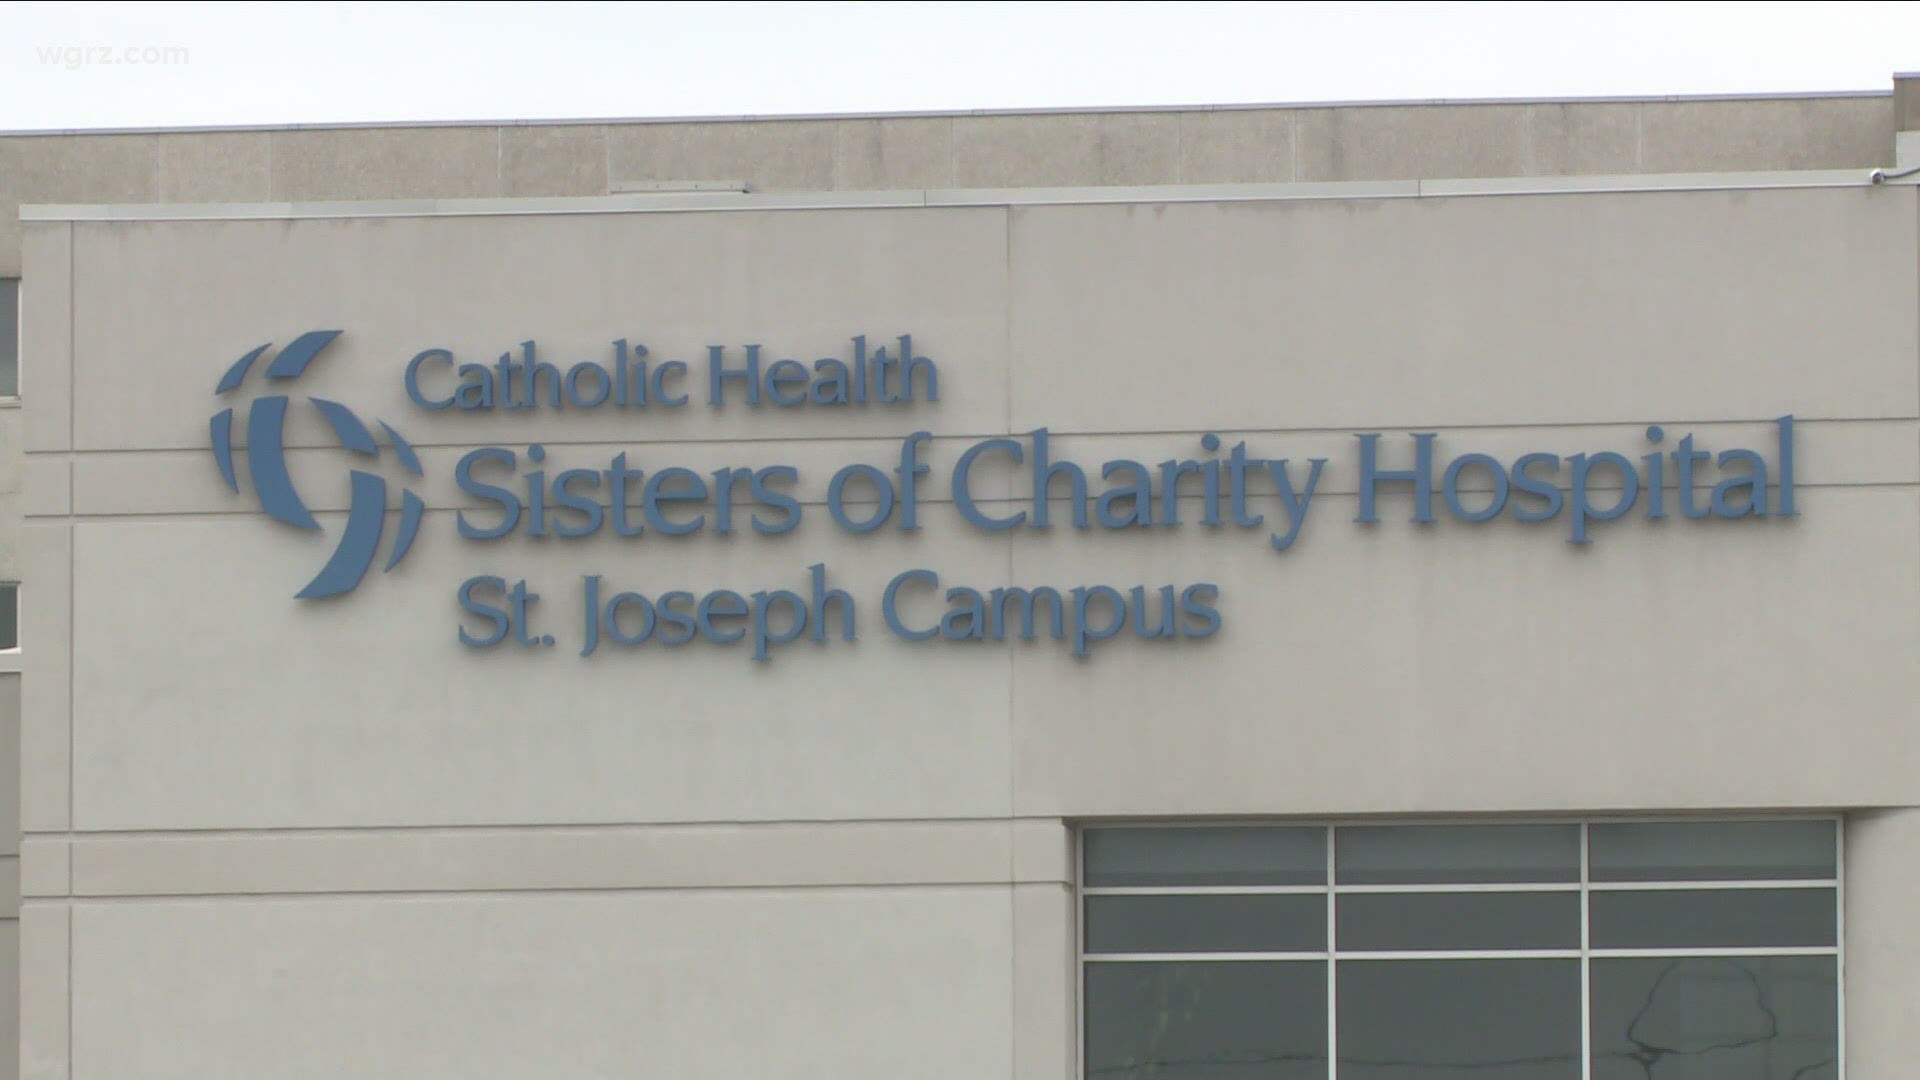 It won't be converting back to a COVID-only hospital just yet, but says it is caring for more than half of COVID patients in all of catholic health's hospitals.